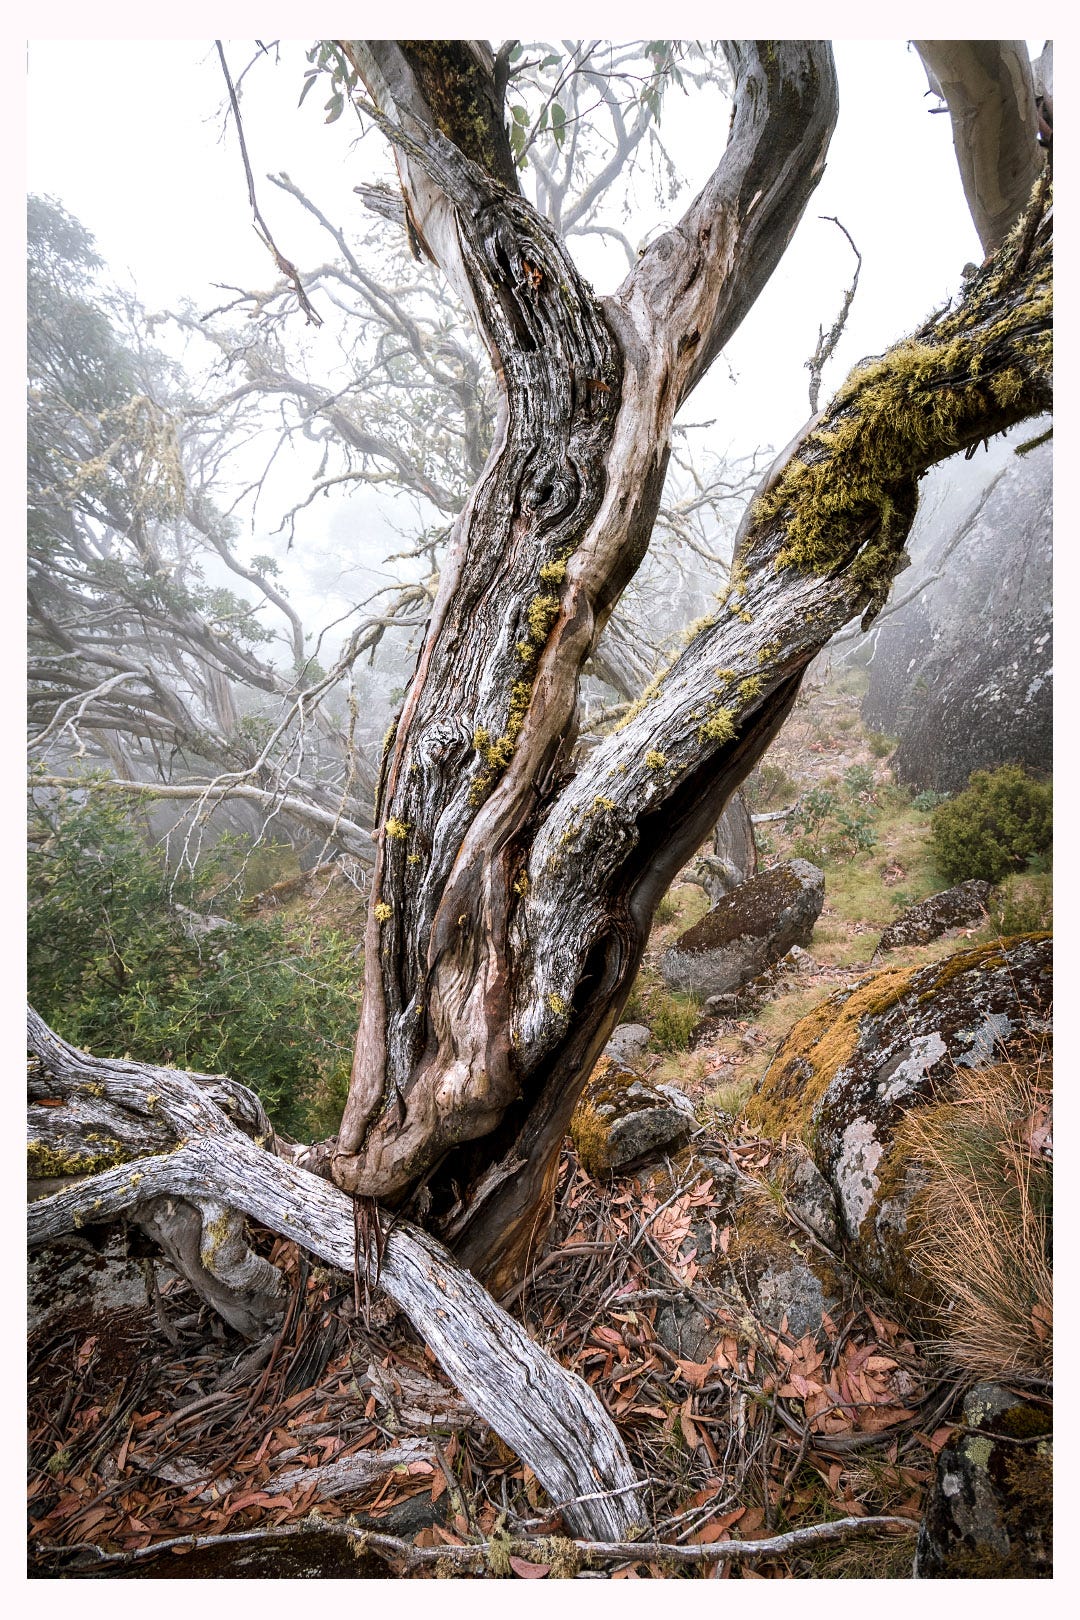 An ancient snow gum, covered in lichen, with much of its bark stripped away to expose the dying heartwood